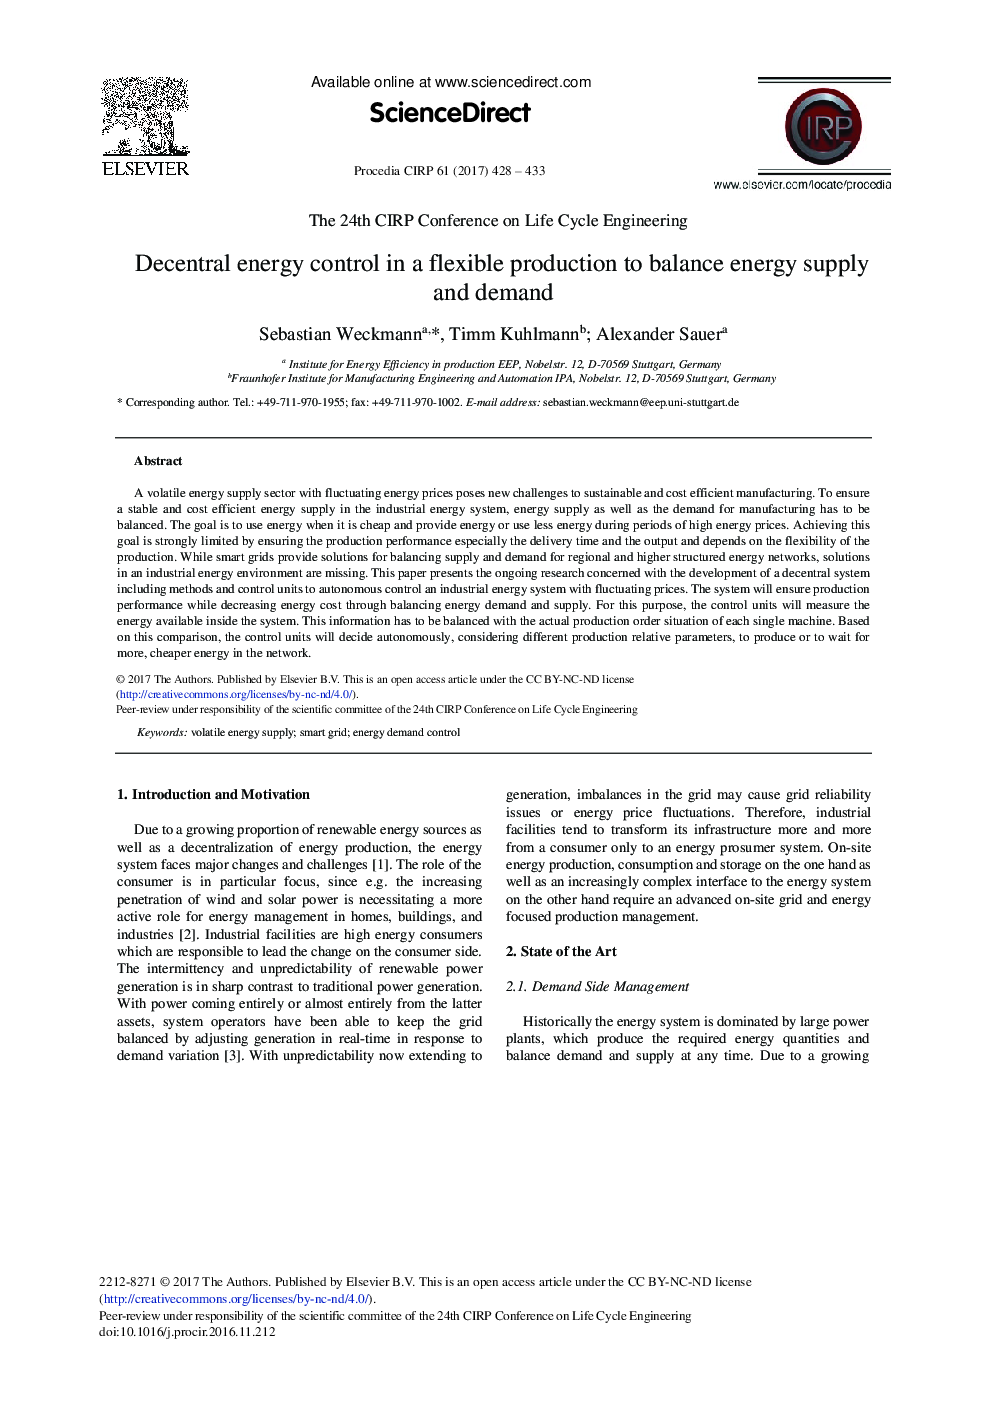 Decentral Energy Control in a Flexible Production to Balance Energy Supply and Demand